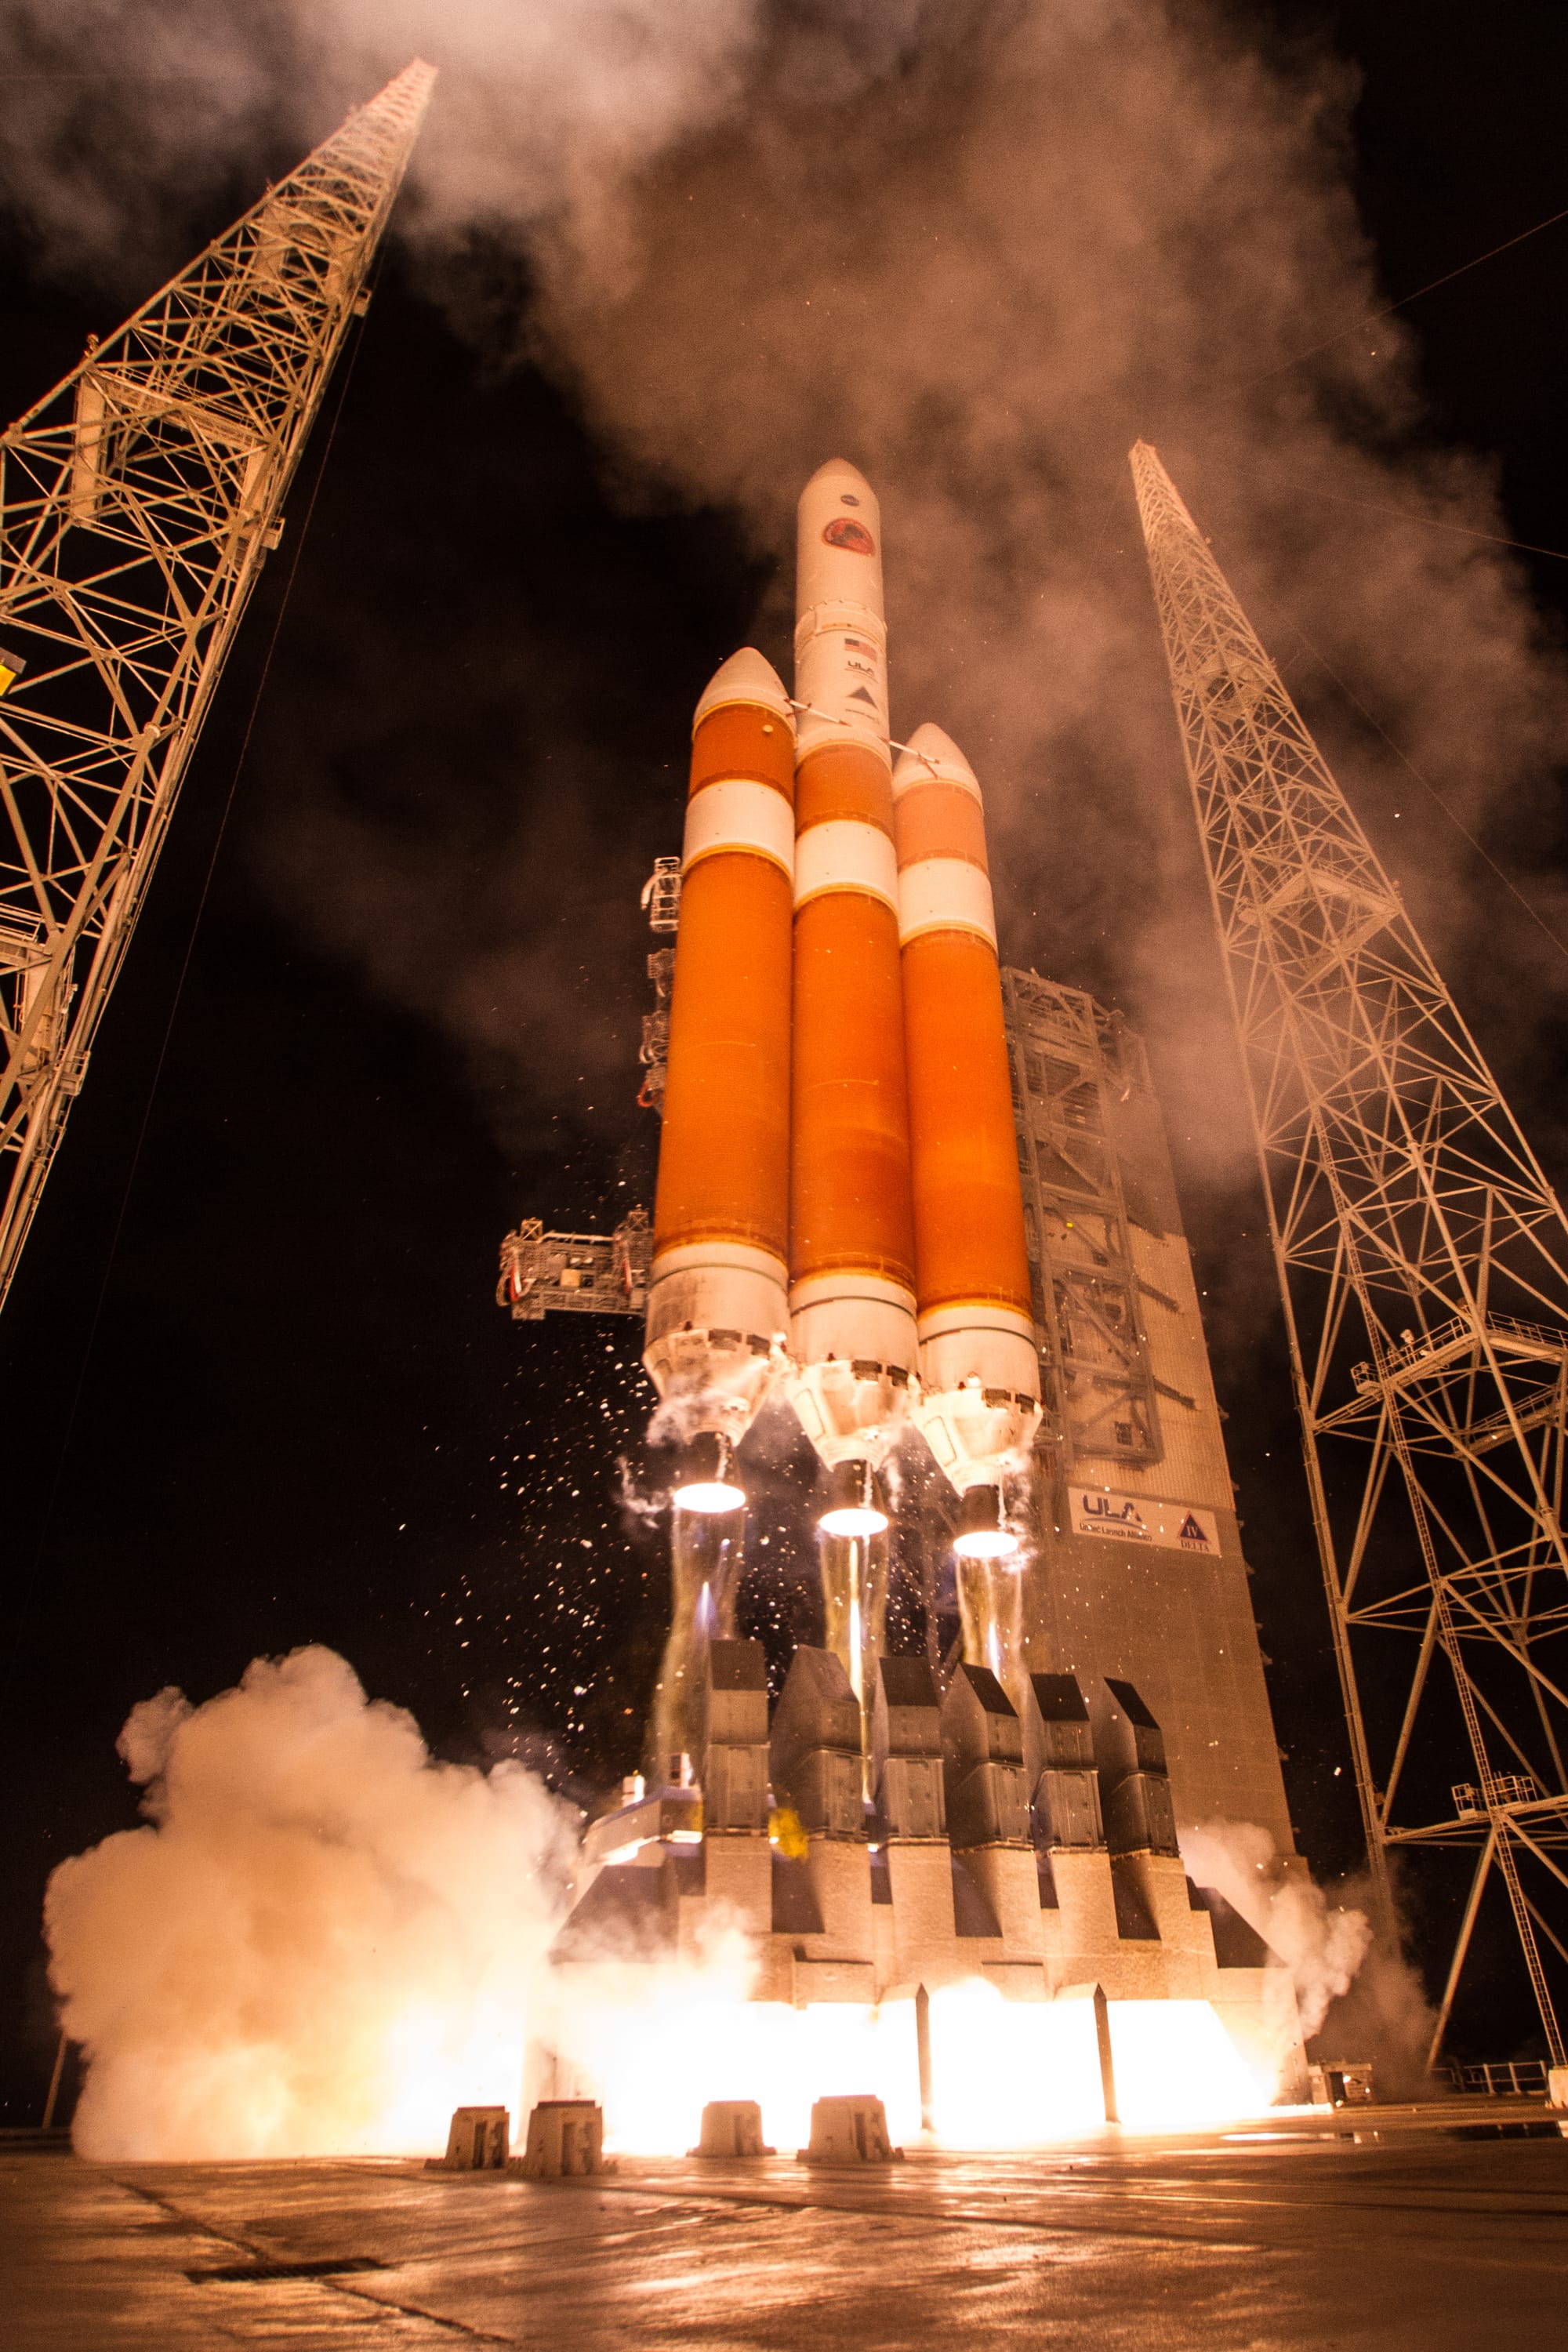 Delta IV Heavy lifting off from Space Launch Complex 37B carrying the Parker Solar Probe in August of 2018. ©United Launch Alliance